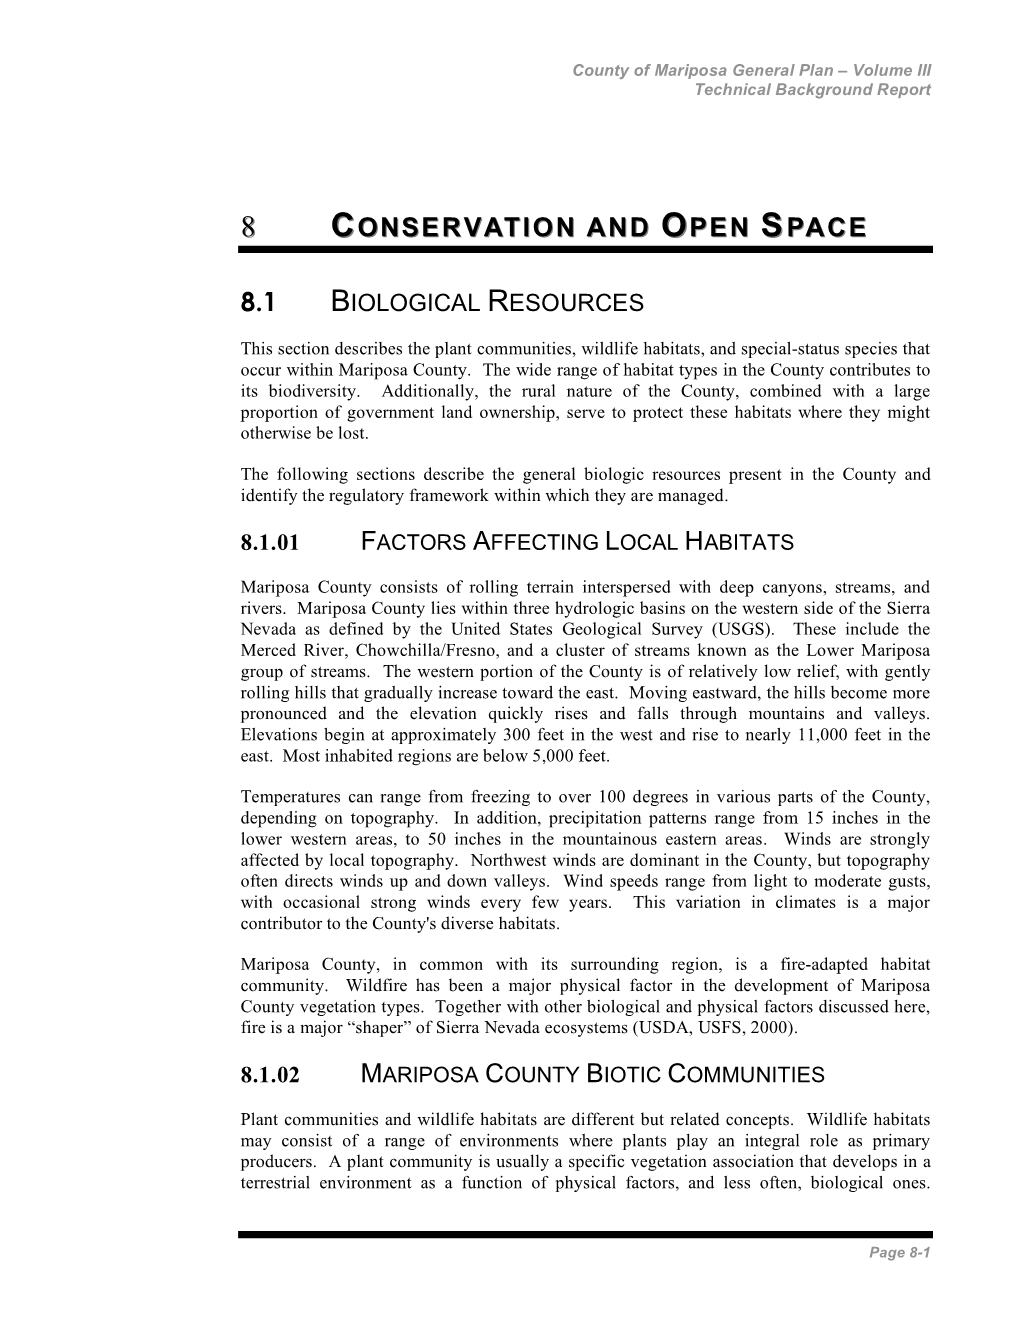 Conservation and Open Space County of Mariposa – Technical Background Report April 4, 2003